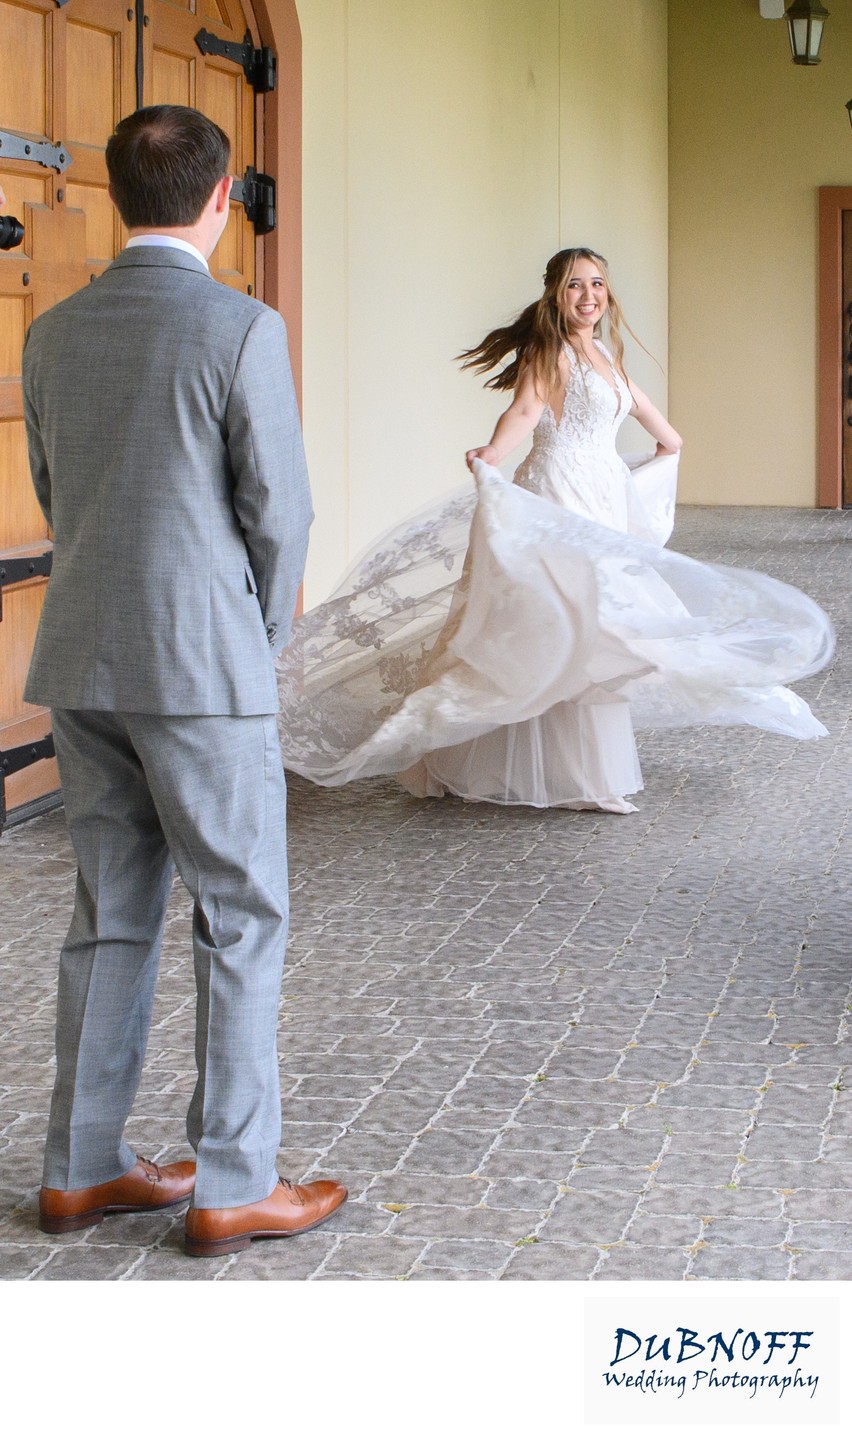 First look Bride spinning for Groom - Bay Area Wedding Photographer